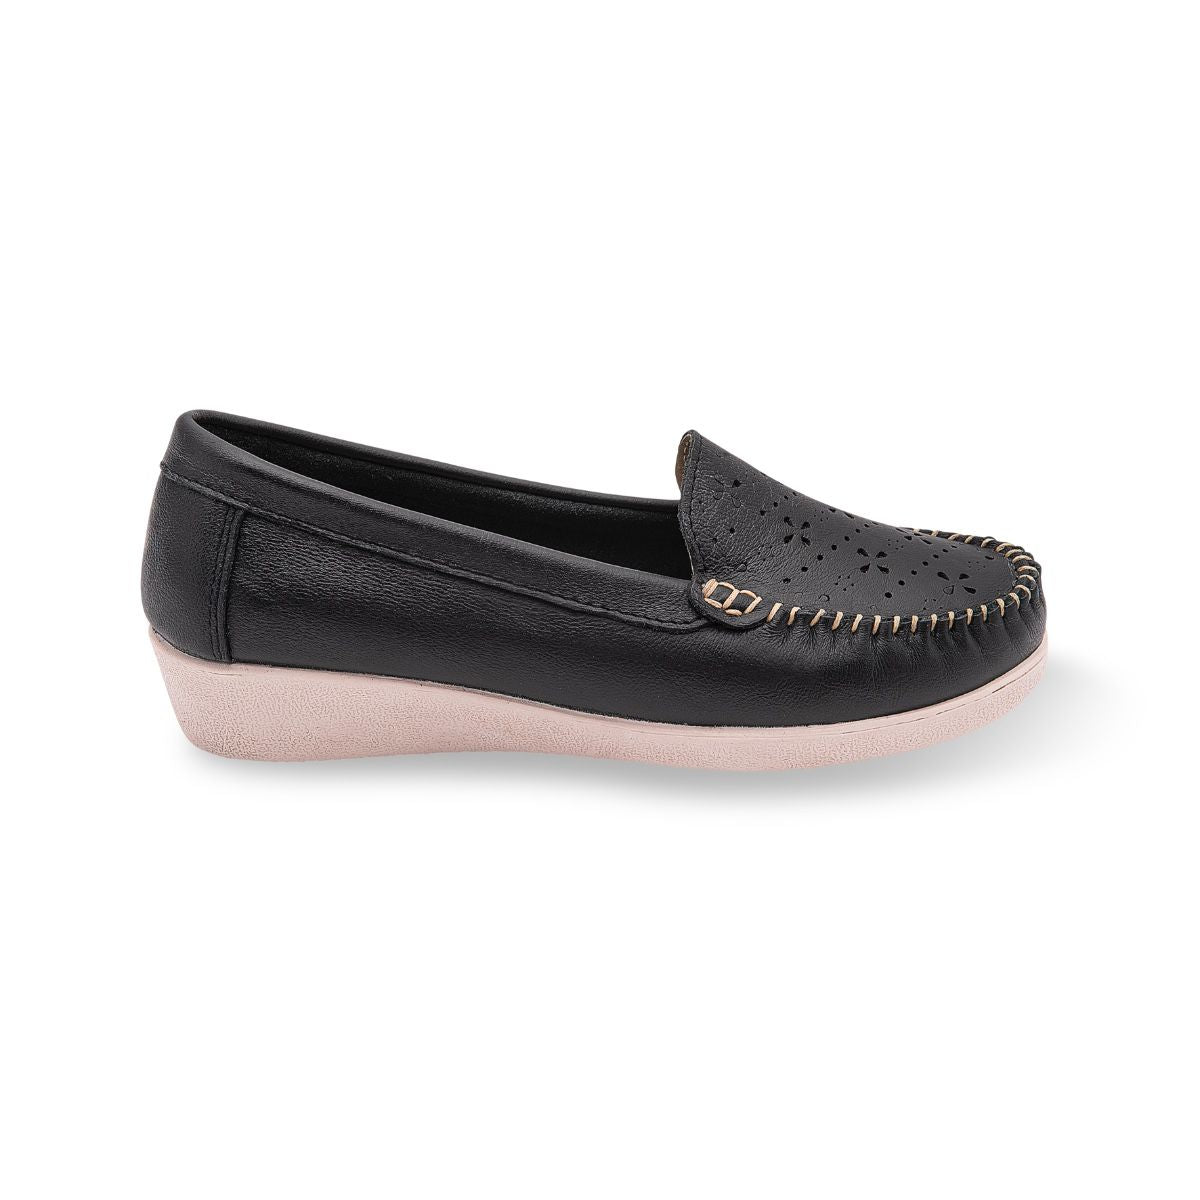 DESCANSO CASUAL MUJER FANCY 923 NEGRO